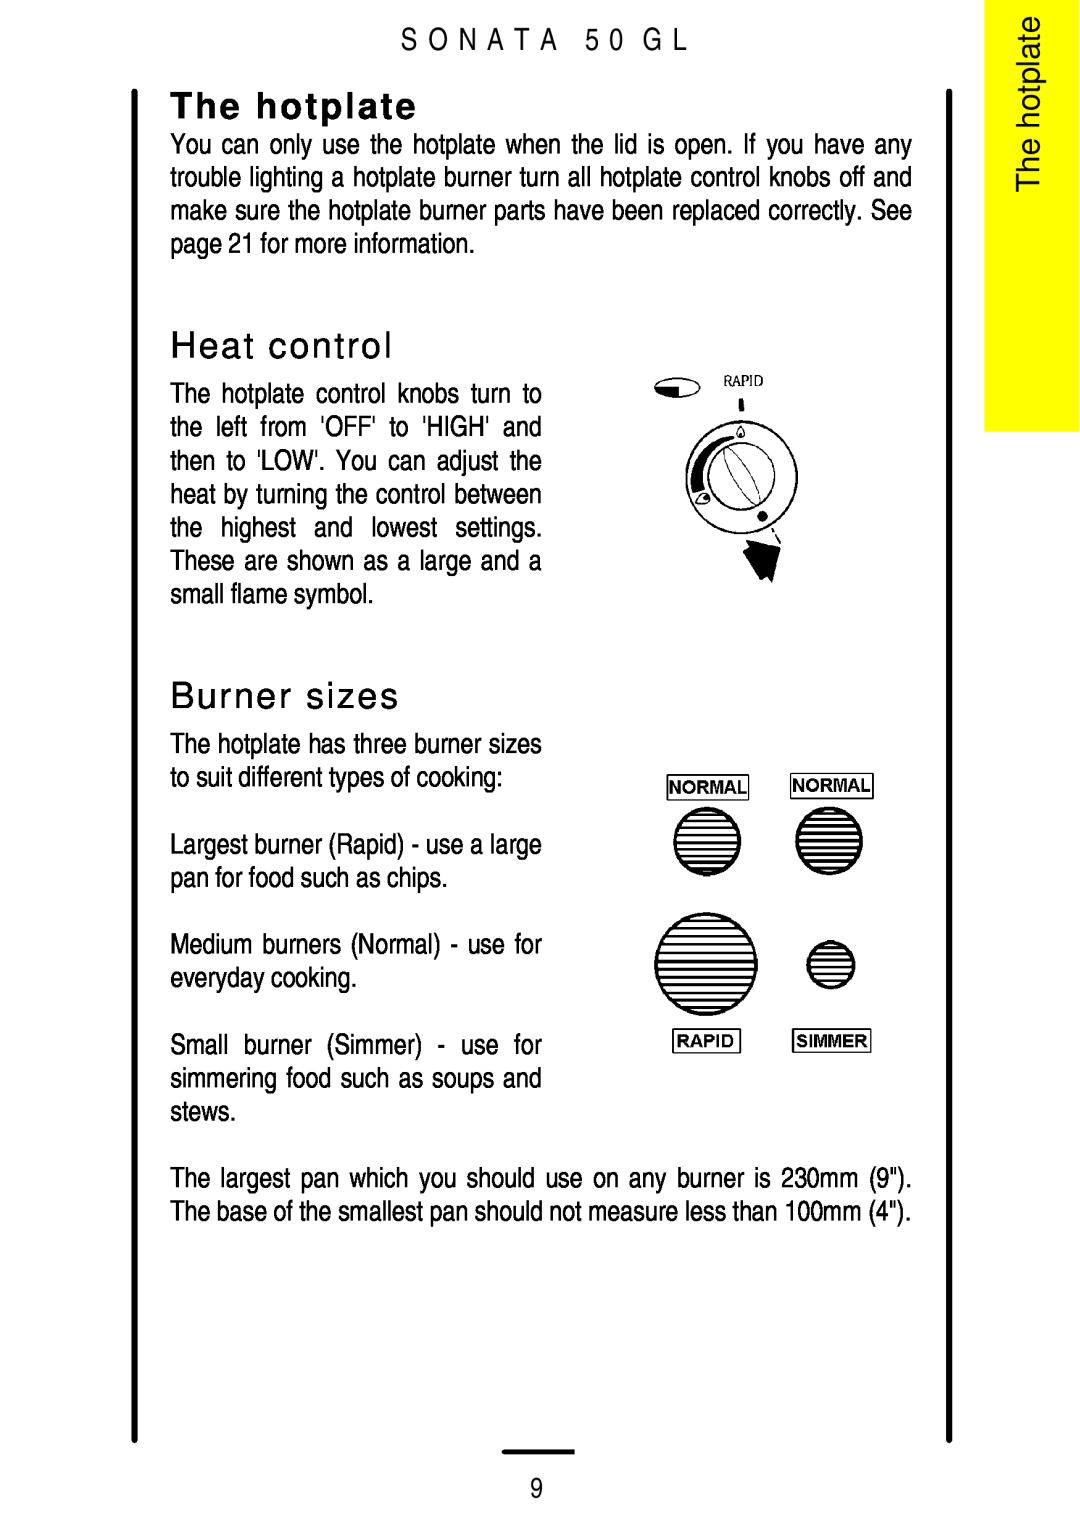 Electrolux installation instructions The hotplate, Burner sizes, Heat control, S O N A T A 5 0 G L 